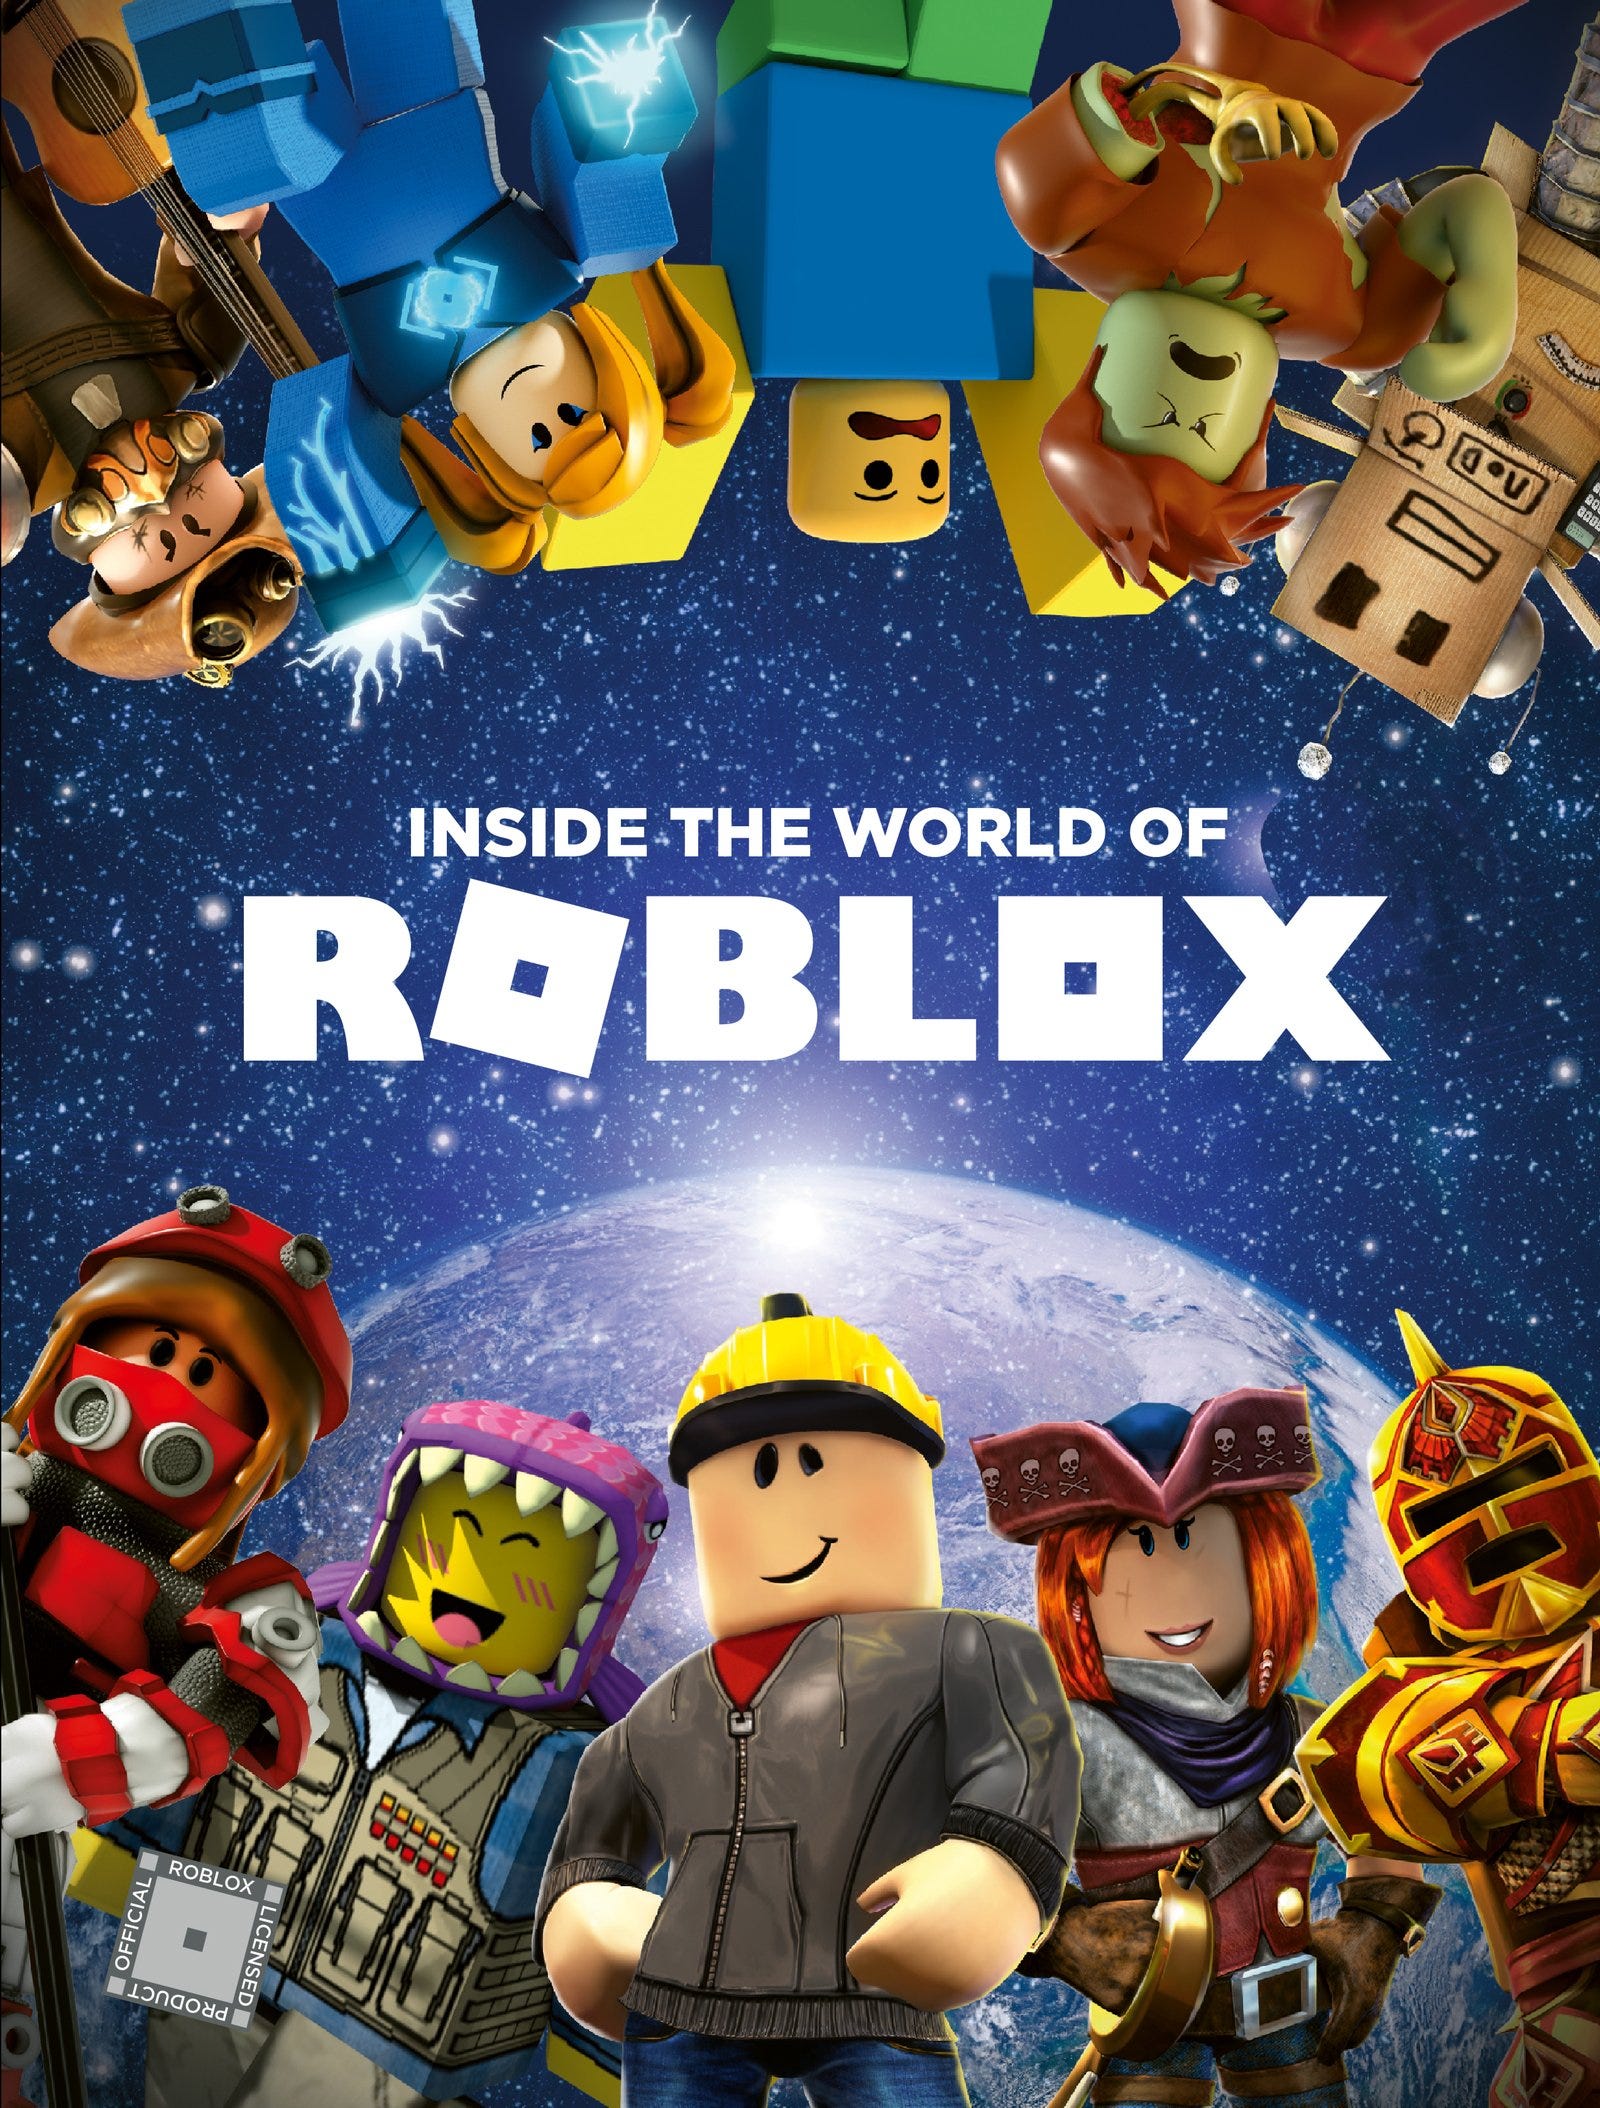 Roblox A Revolution The Online Gaming Platform Roblox Has By Theblogcrafter Medium - what is the game roblox